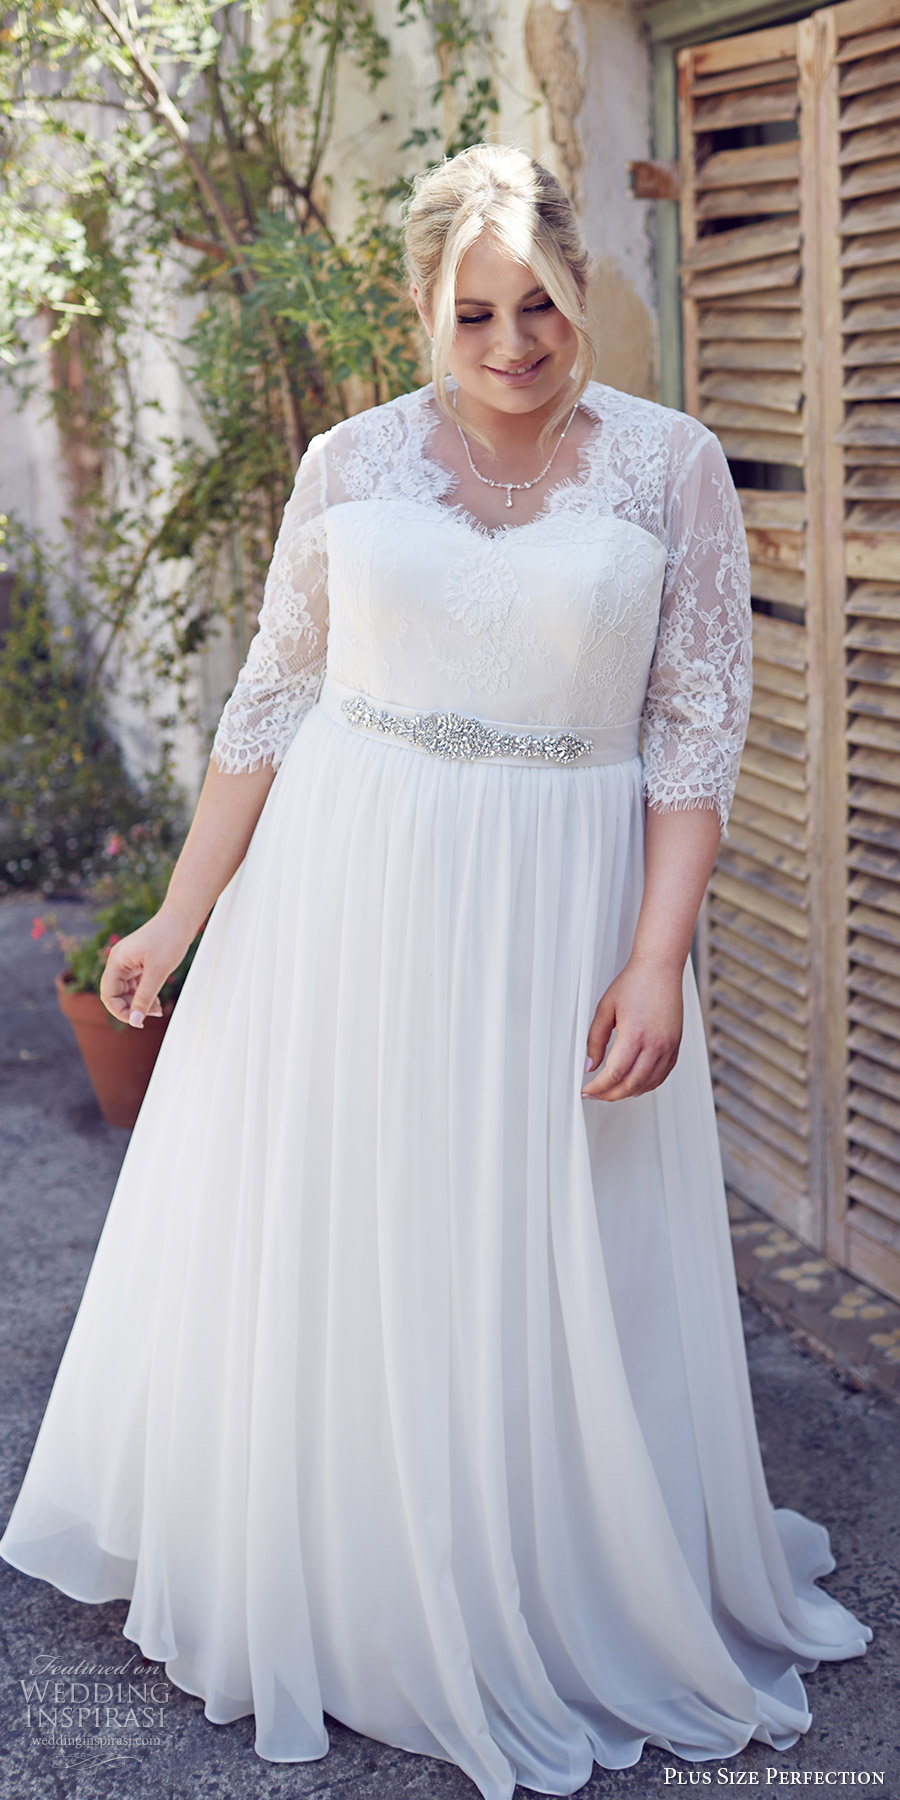 3 Plus Size Illusion Neckline Fitted Lace Wedding Dresses We Love